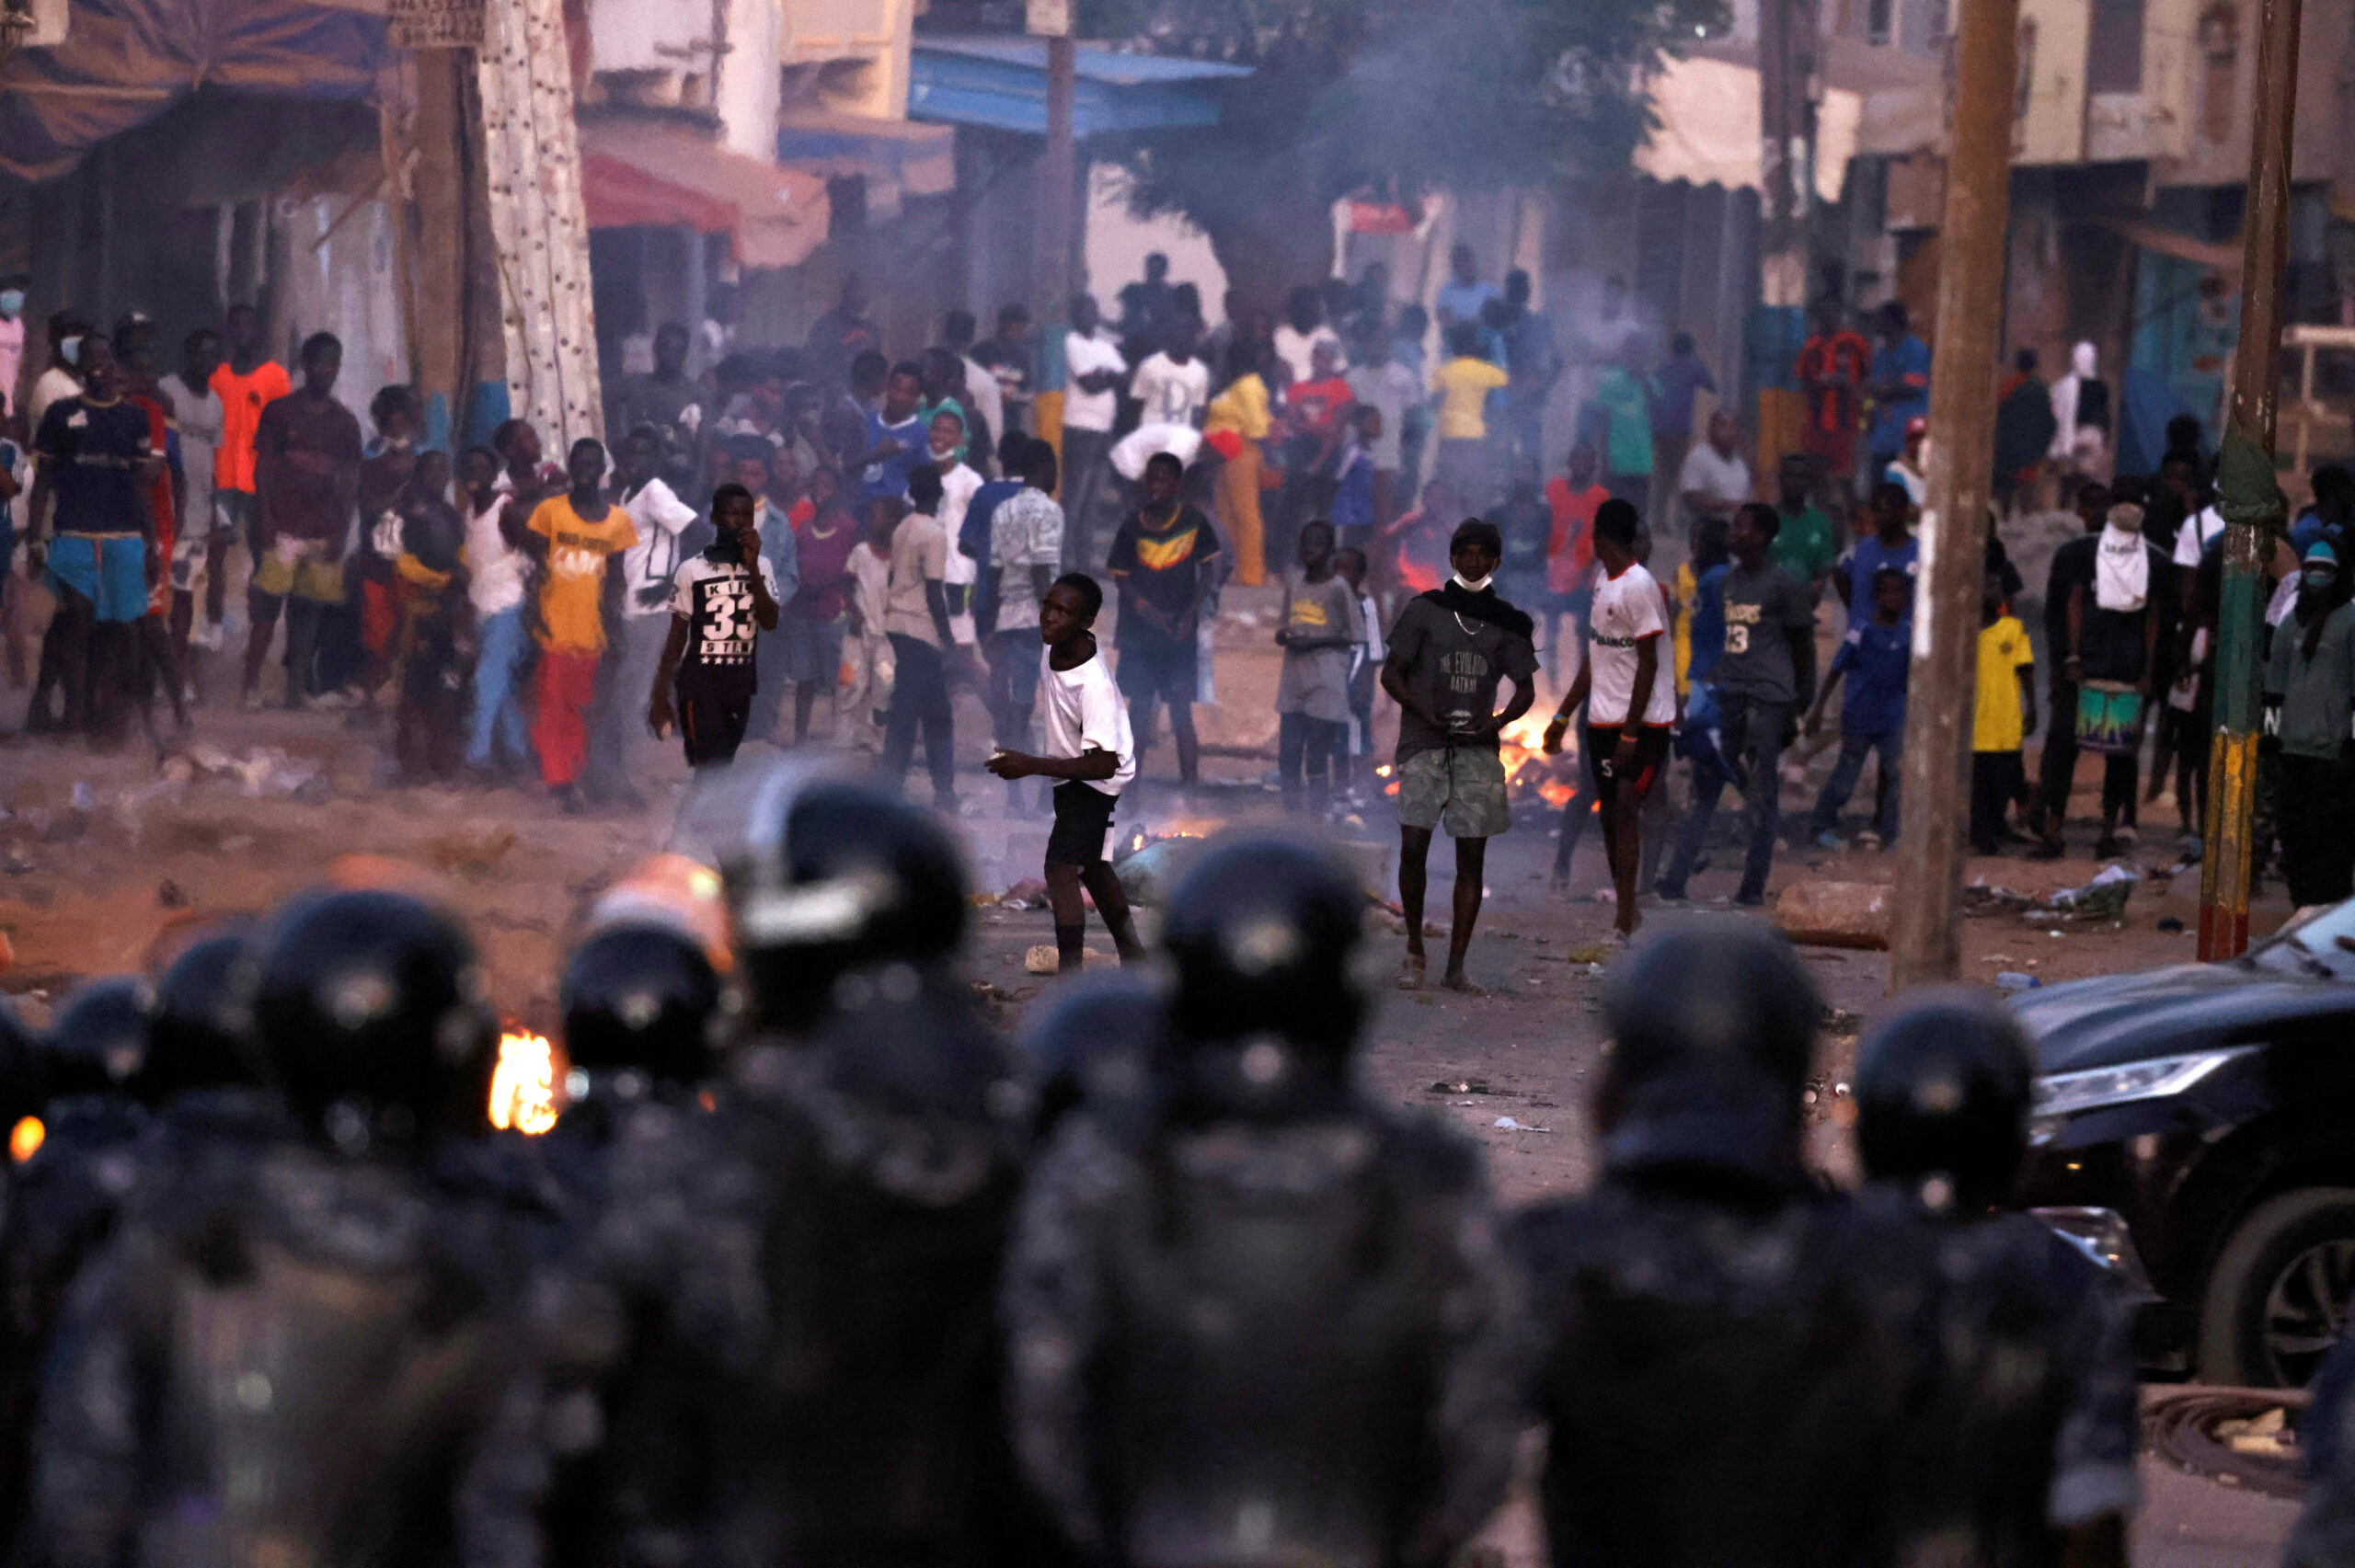 Senegal: Concerns over deadly repression, violence and internet shutdowns - Civic Space